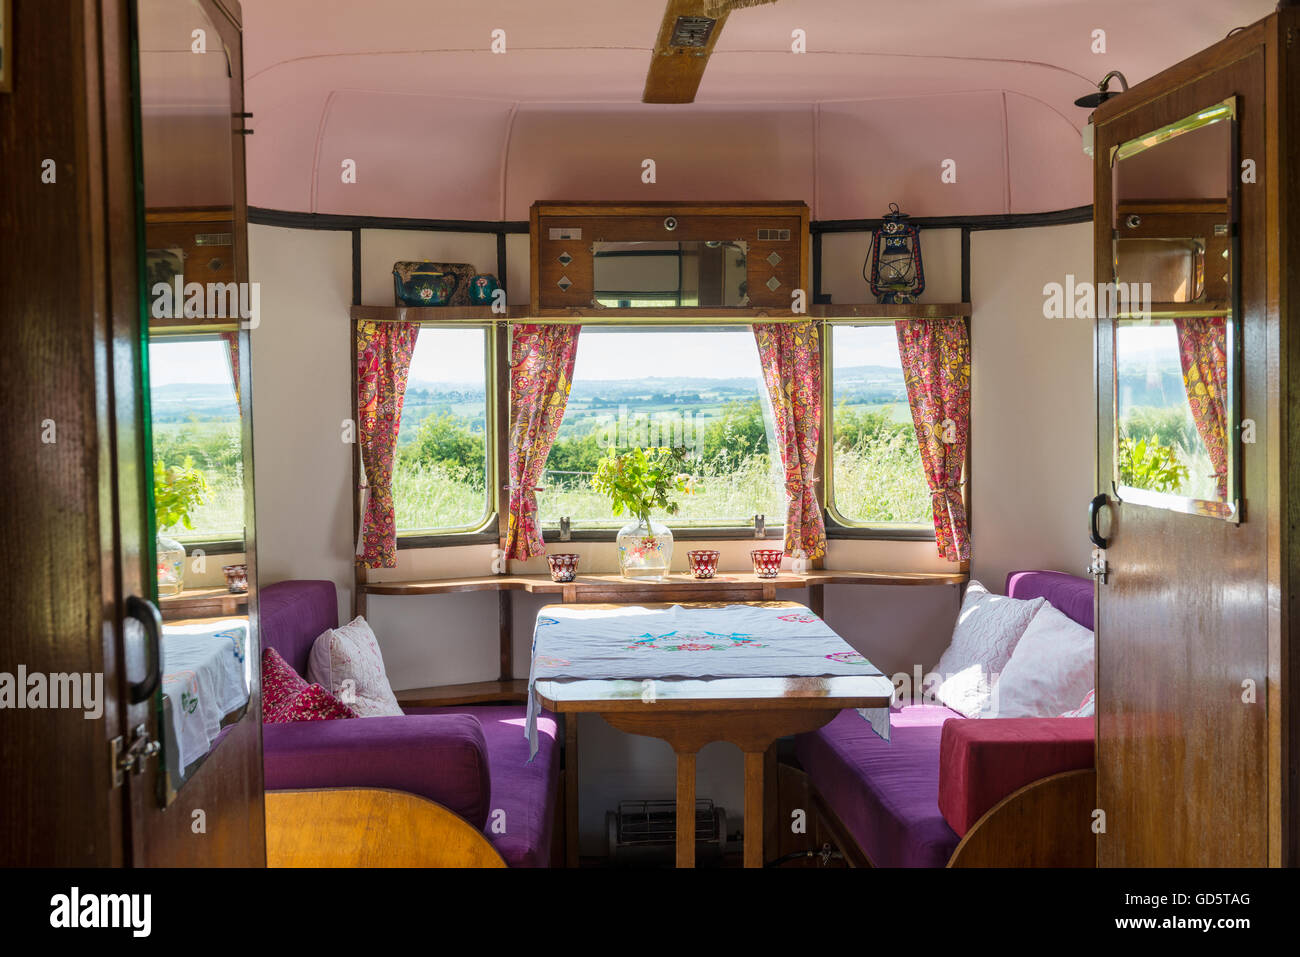 Seating area in caravan with retro style furnishings and coutryside views Stock Photo